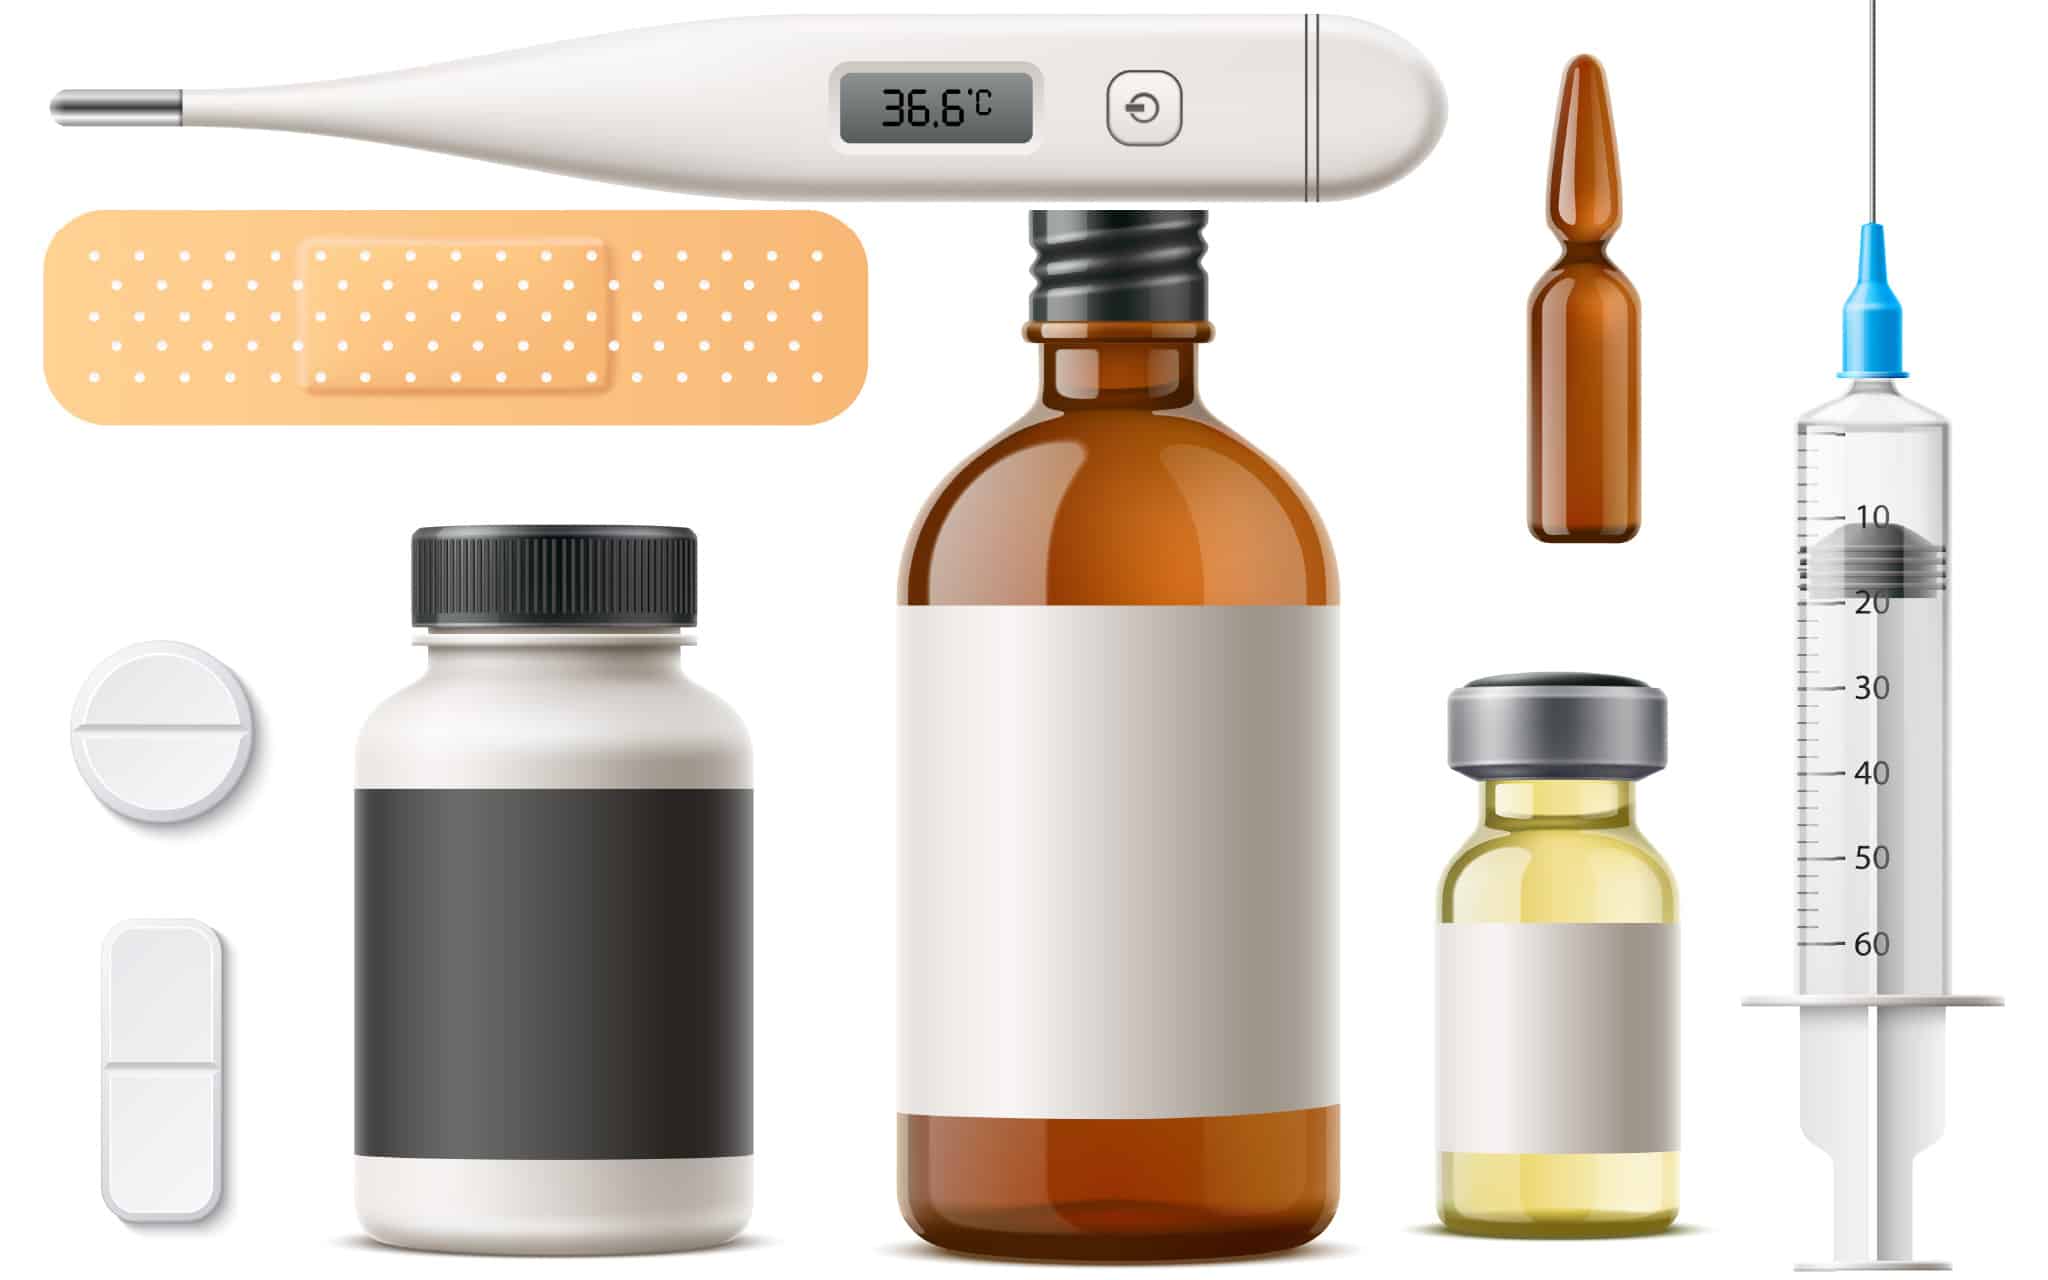 Illustration of Sterile Products